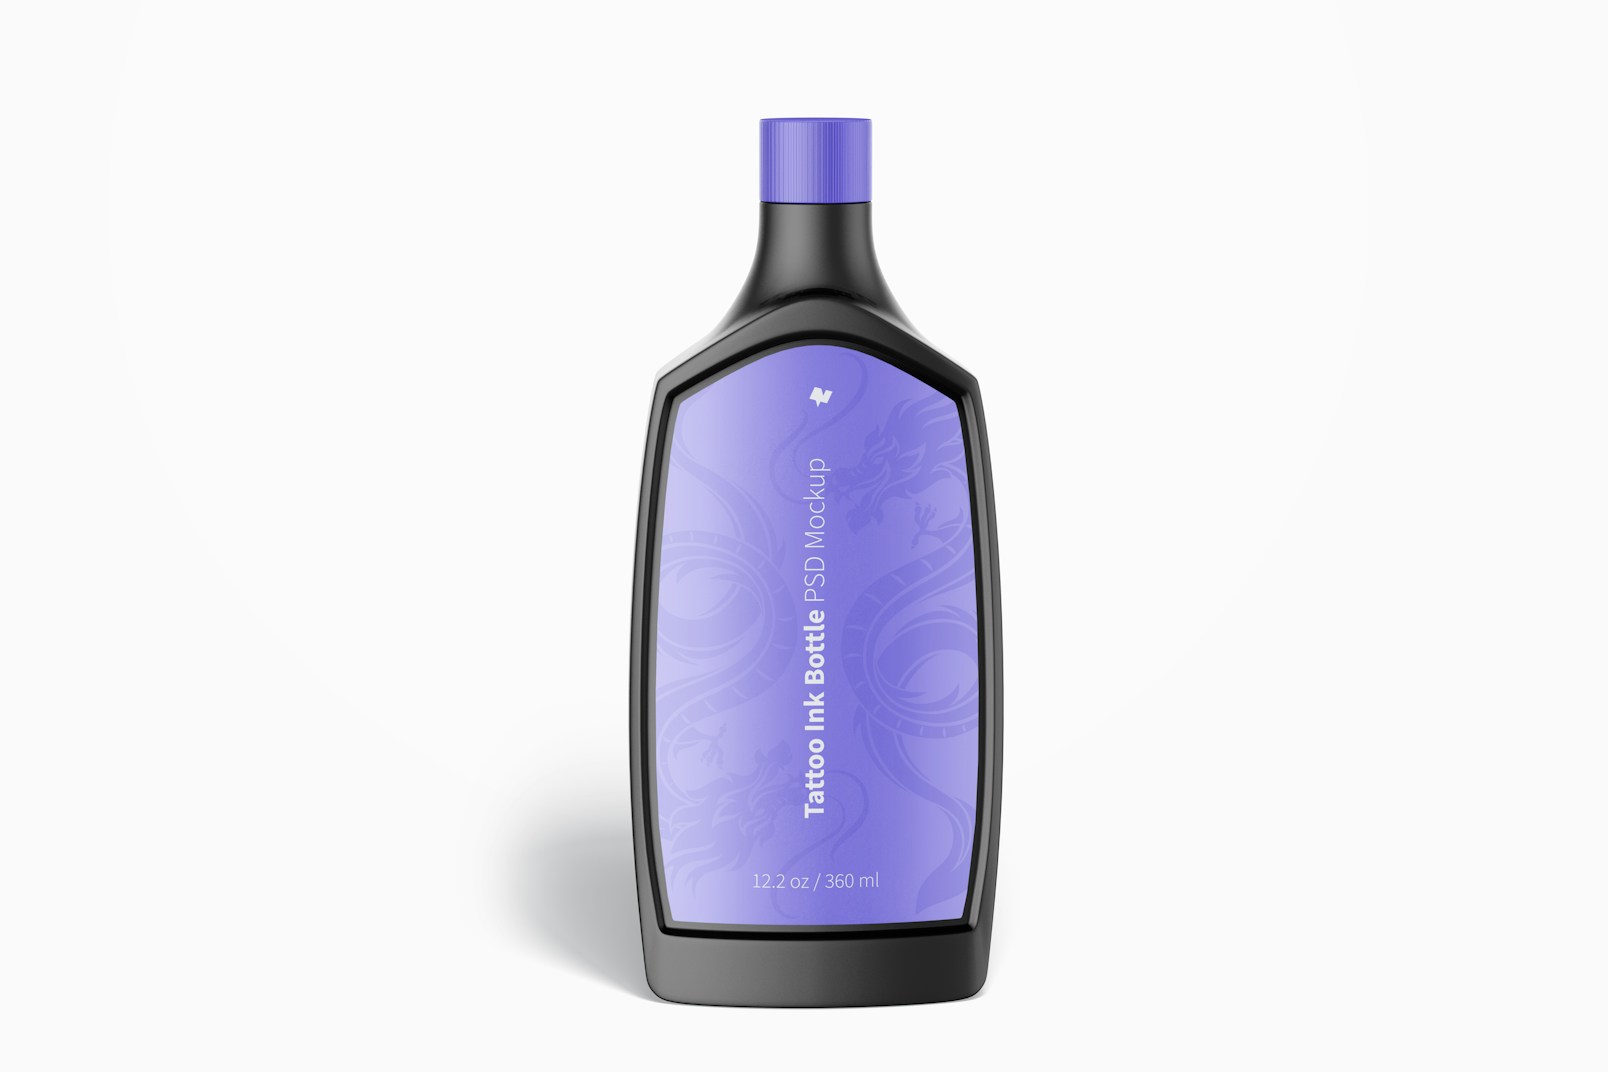 12.2 oz Tattoo Ink Bottle Mockup, Front View